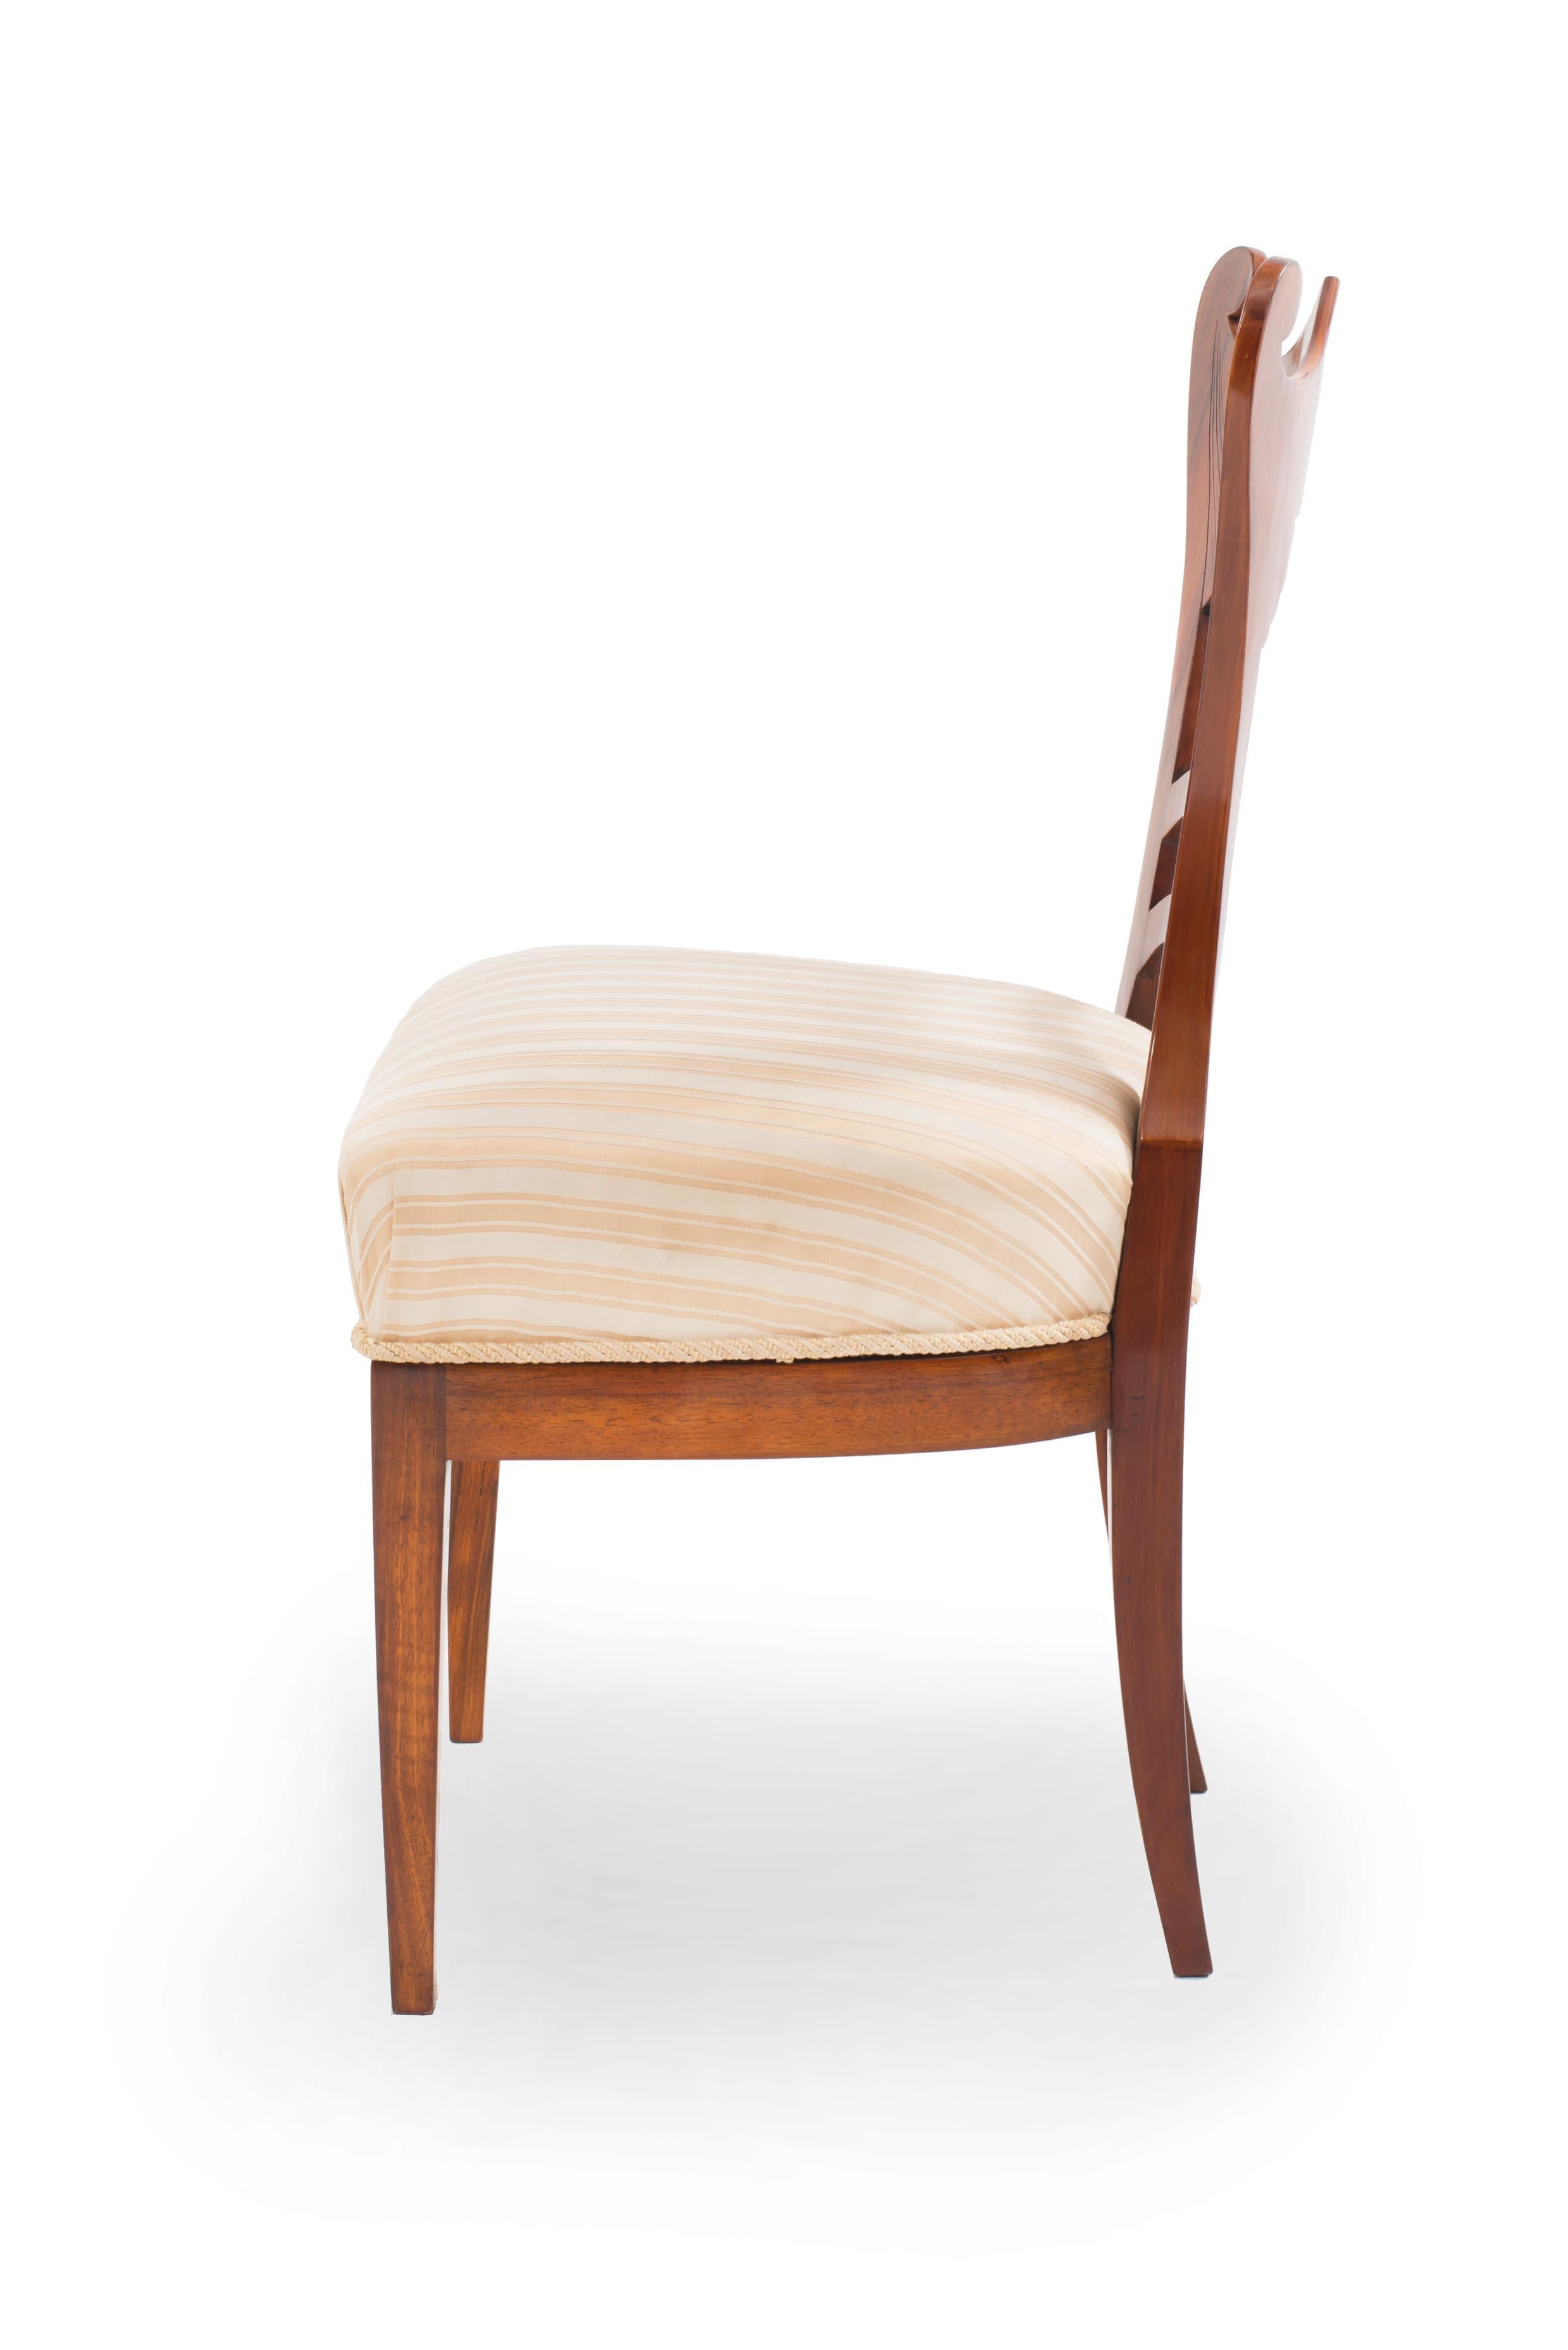 Pair of Austrian Biedermeier cherrywood side chairs with scroll and fluted design on back and upholstered seat. (Circa 1830)
